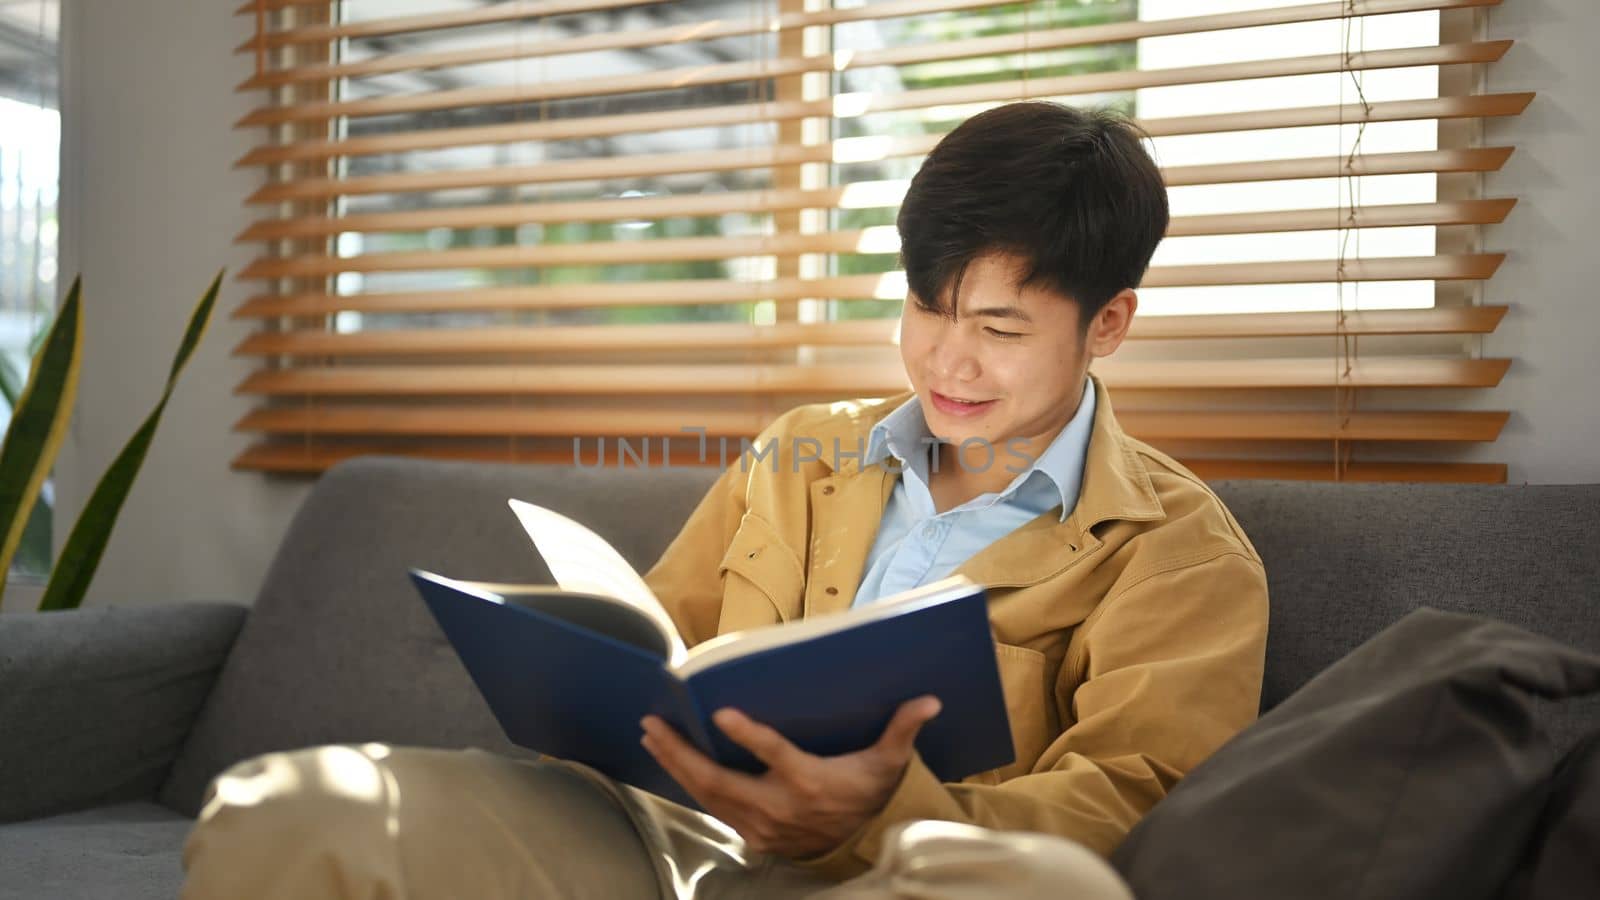 Satisfied man reading book, relaxing on comfortable couch at home. Leisure activity, positive mood concept.